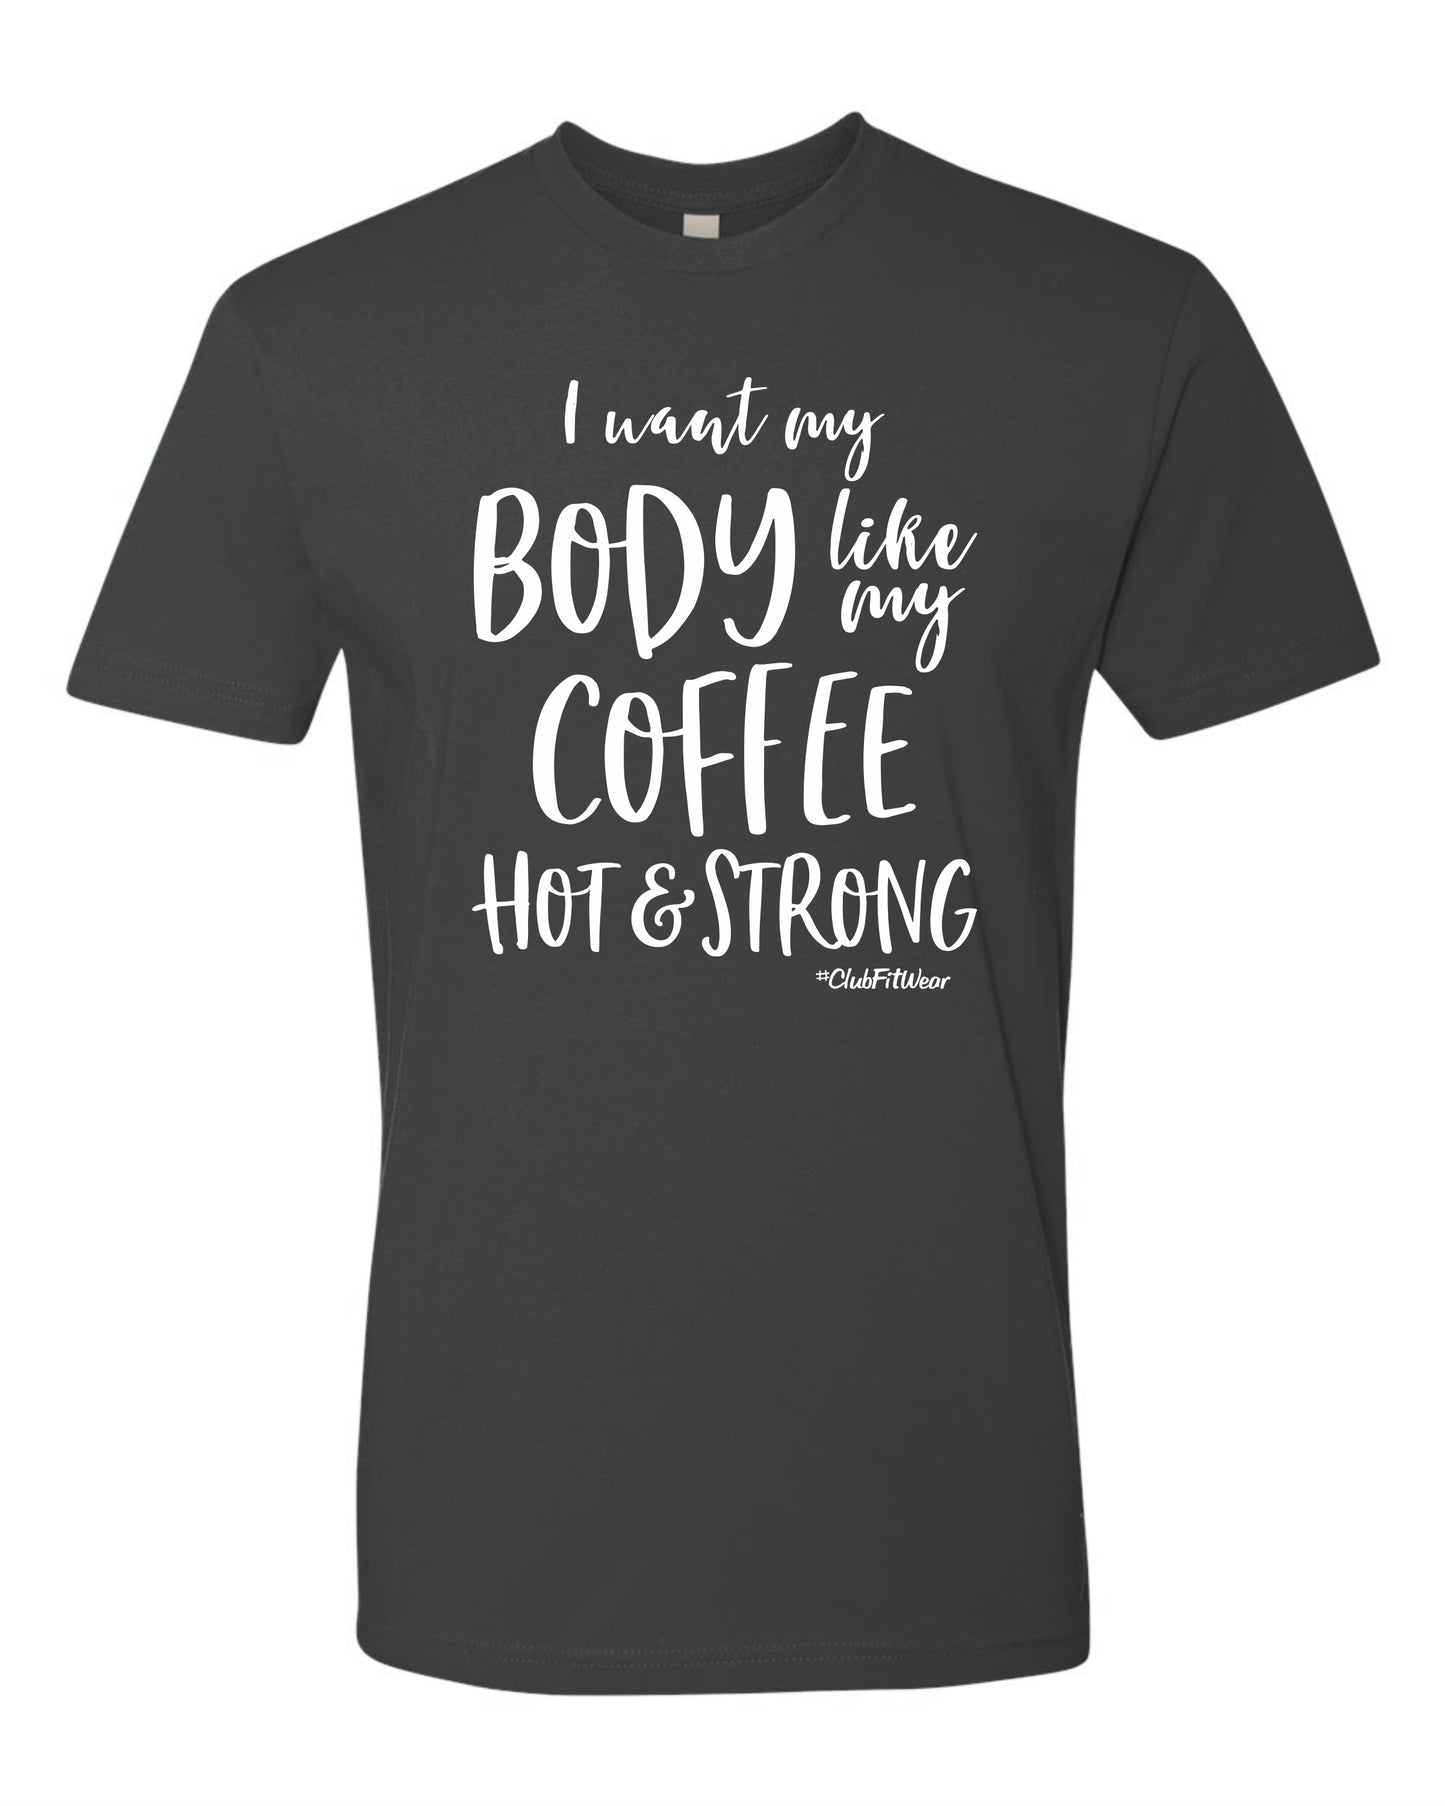 I want my Body like my Coffee Hot & Strong